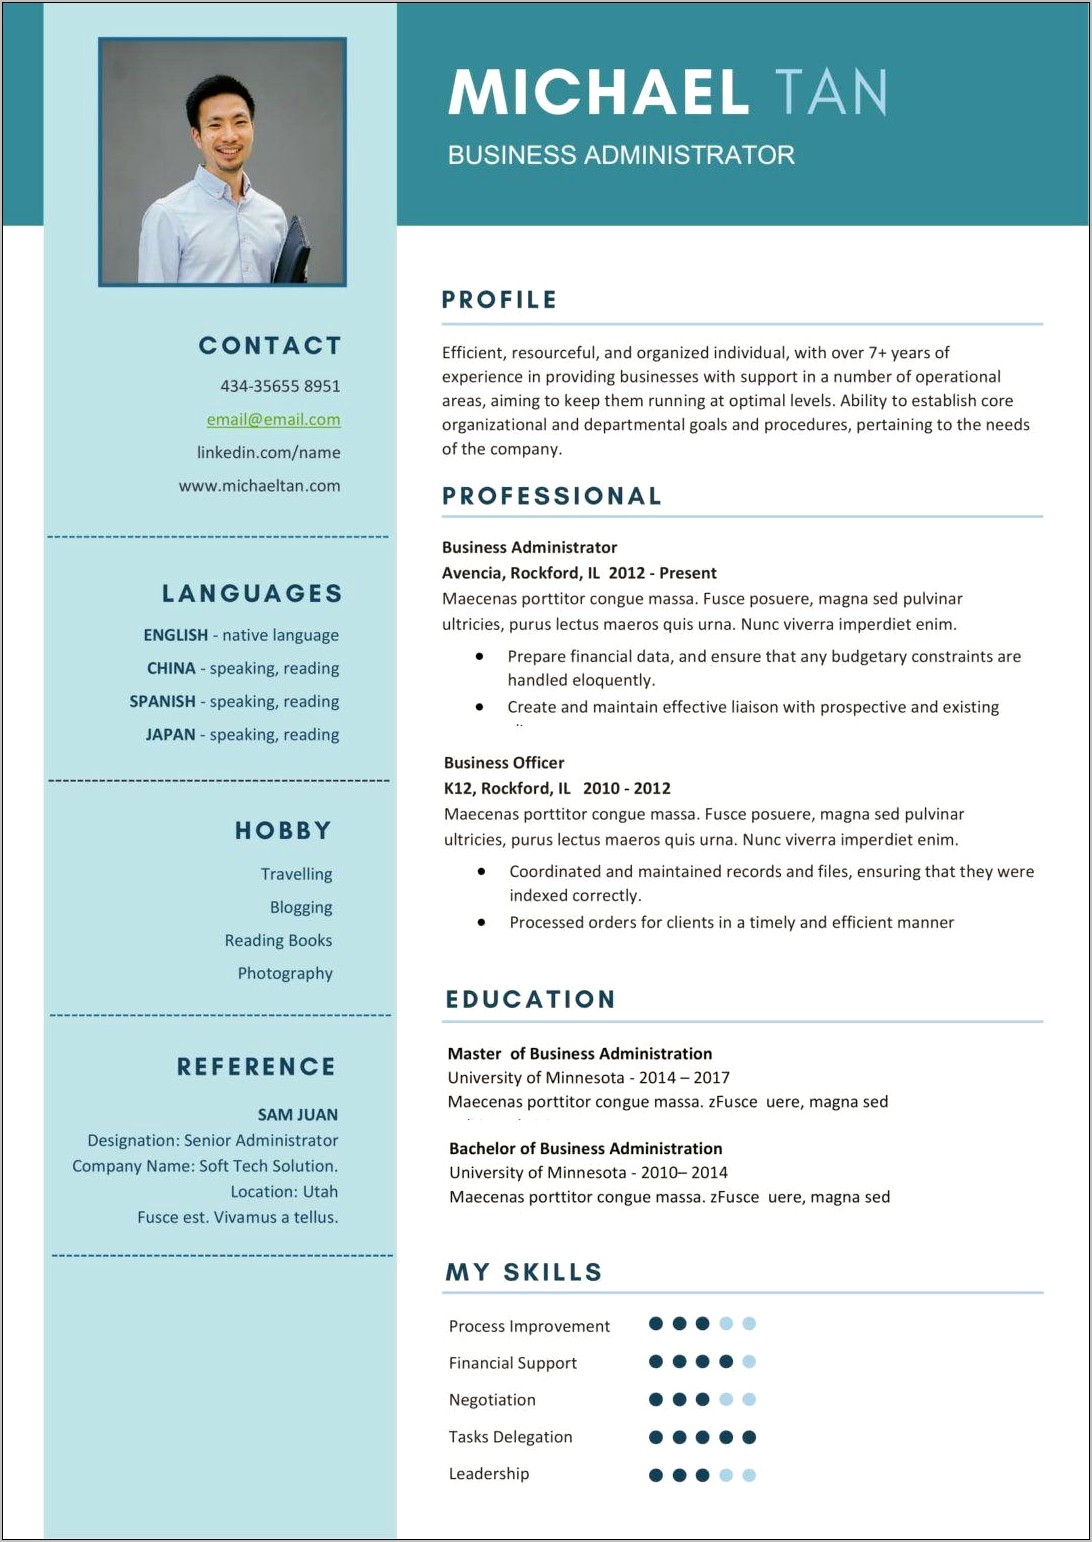 New Resume Format Free Download